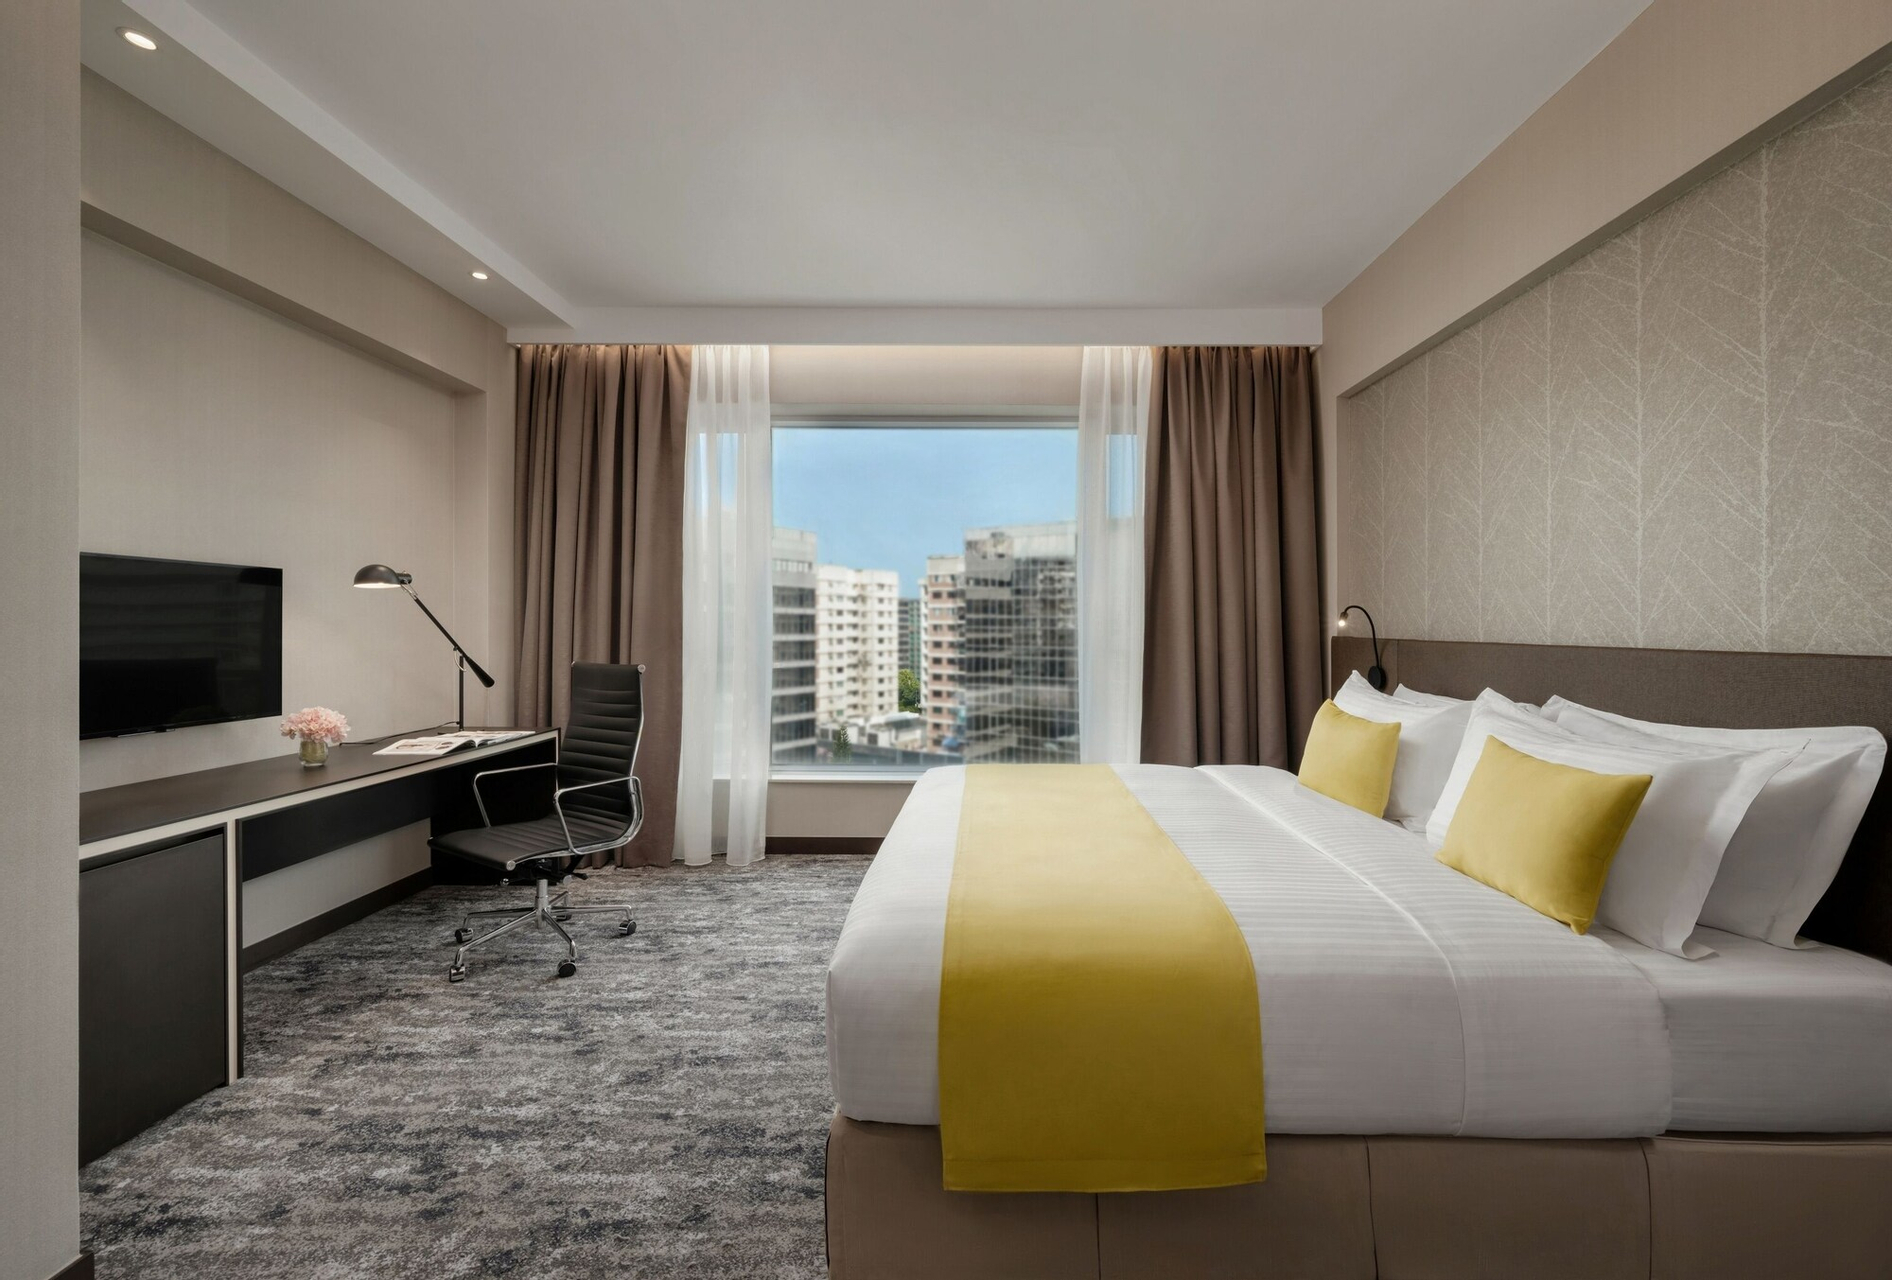 King Deluxe Room - City View